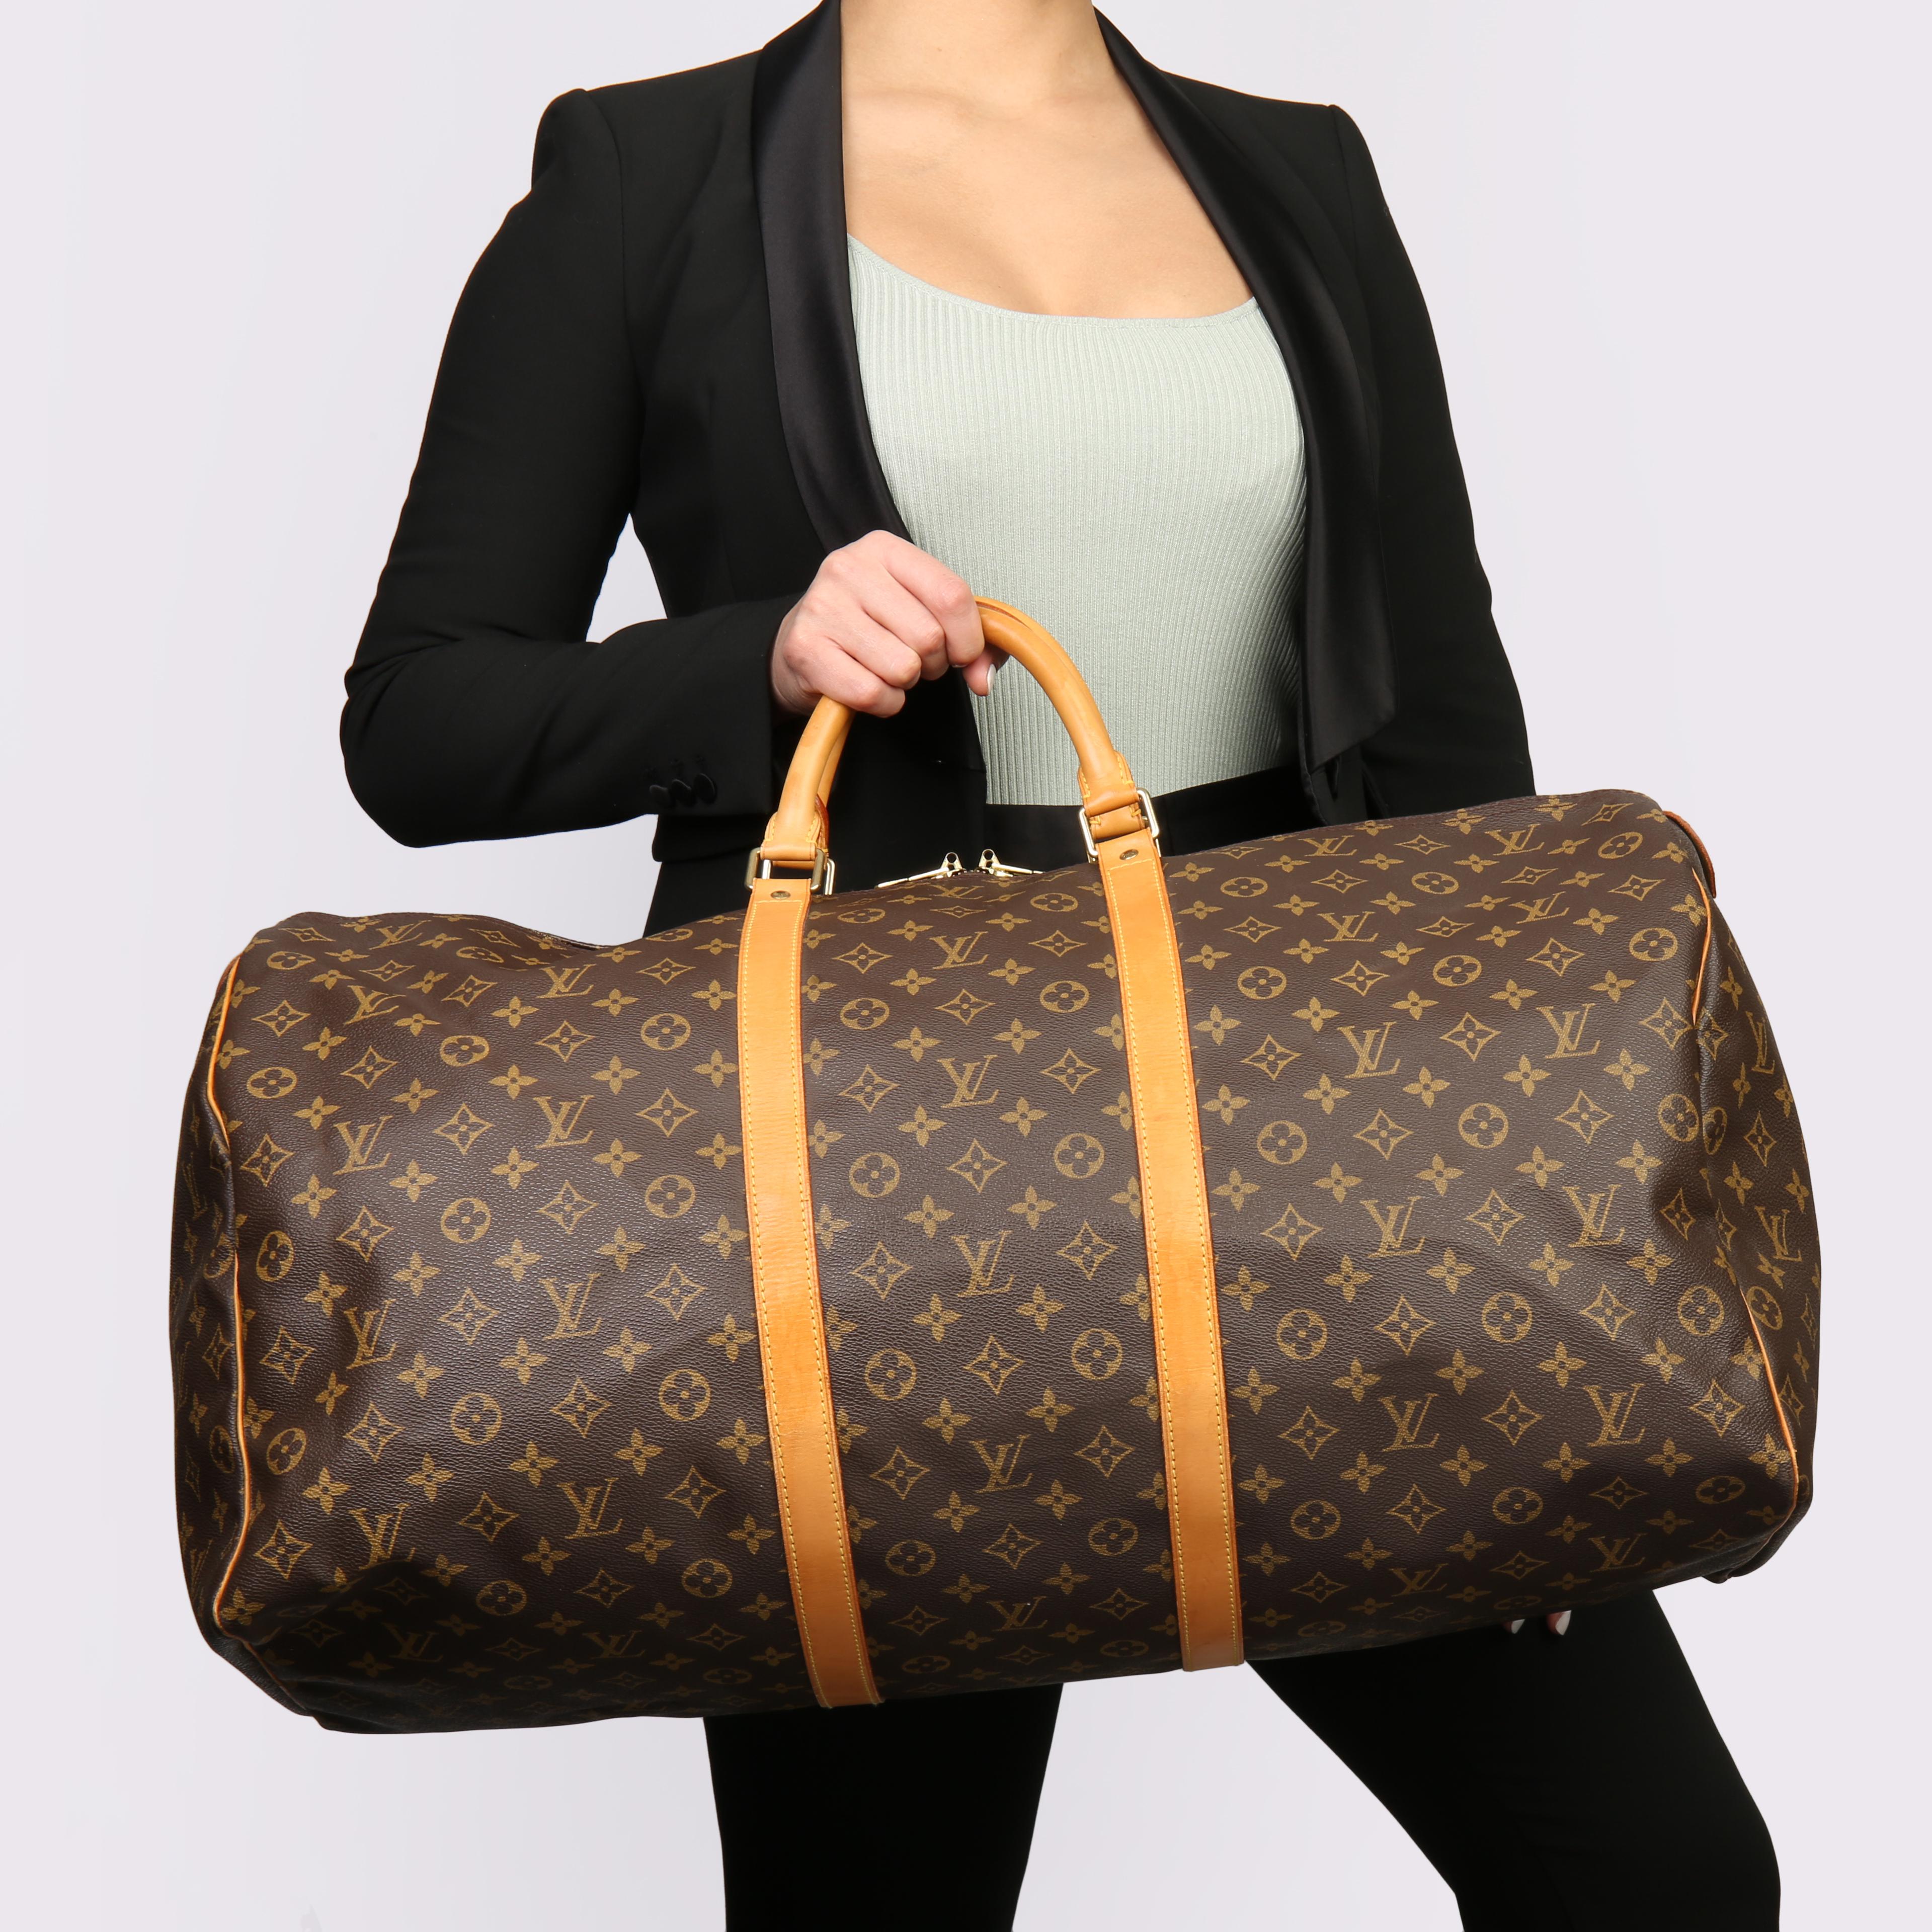 LOUIS VUITTON
Brown Monogram Coated Canvas & Vachetta Leather Vintage Keepall 55

Xupes Reference: HB3705
Serial Number: MI 882
Age (Circa): 1988
Accompanied By: Luggage Tag, Handle Keeper
Authenticity Details: Date Stamp (Made in France) 
Gender: